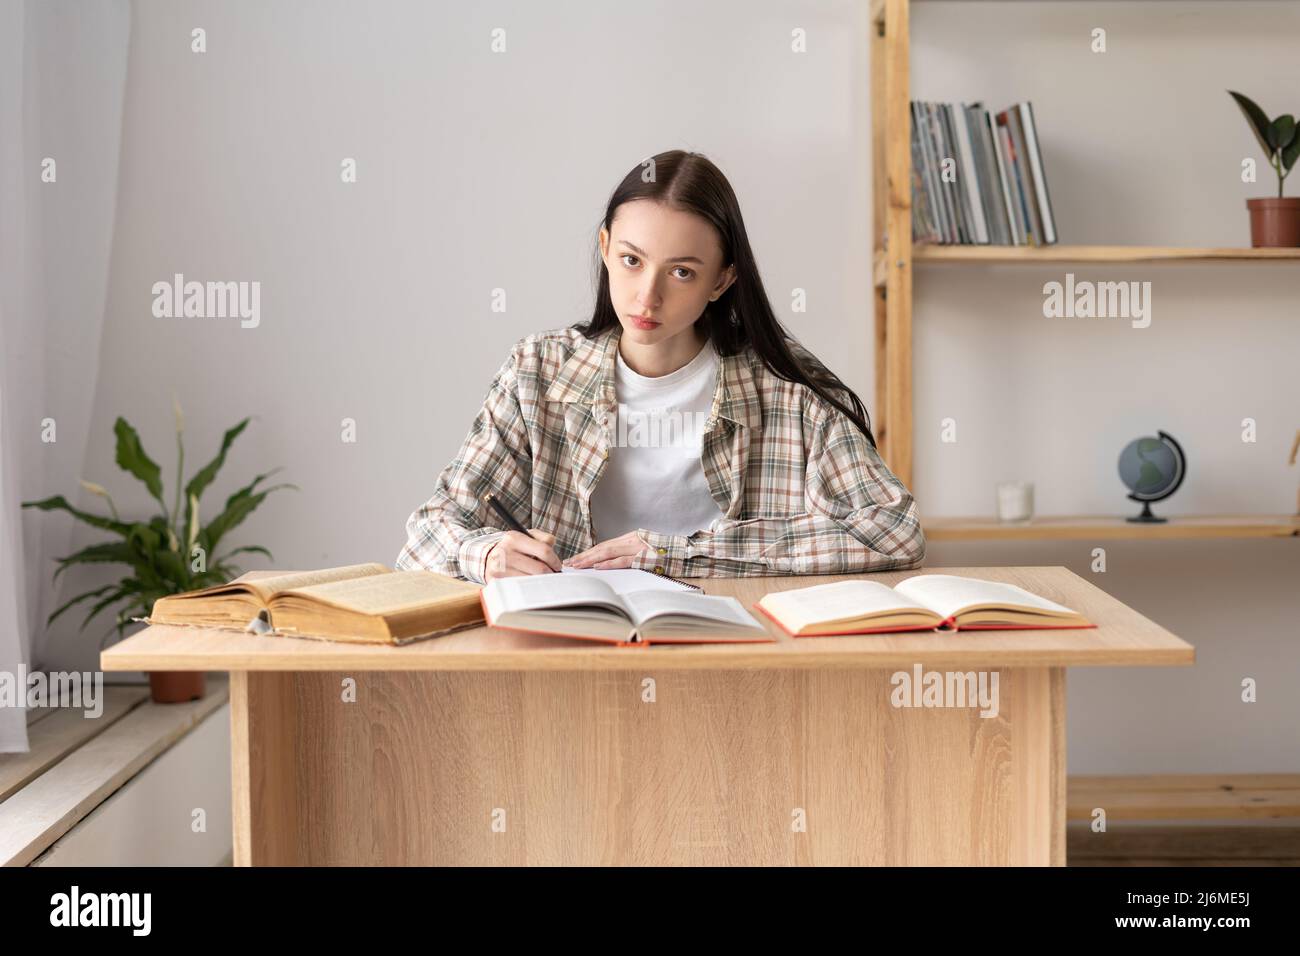 High school student taking notes from a book for study. Caucasian girl sitting at the table doing homework. Focused girl studying in the classroom Stock Photo